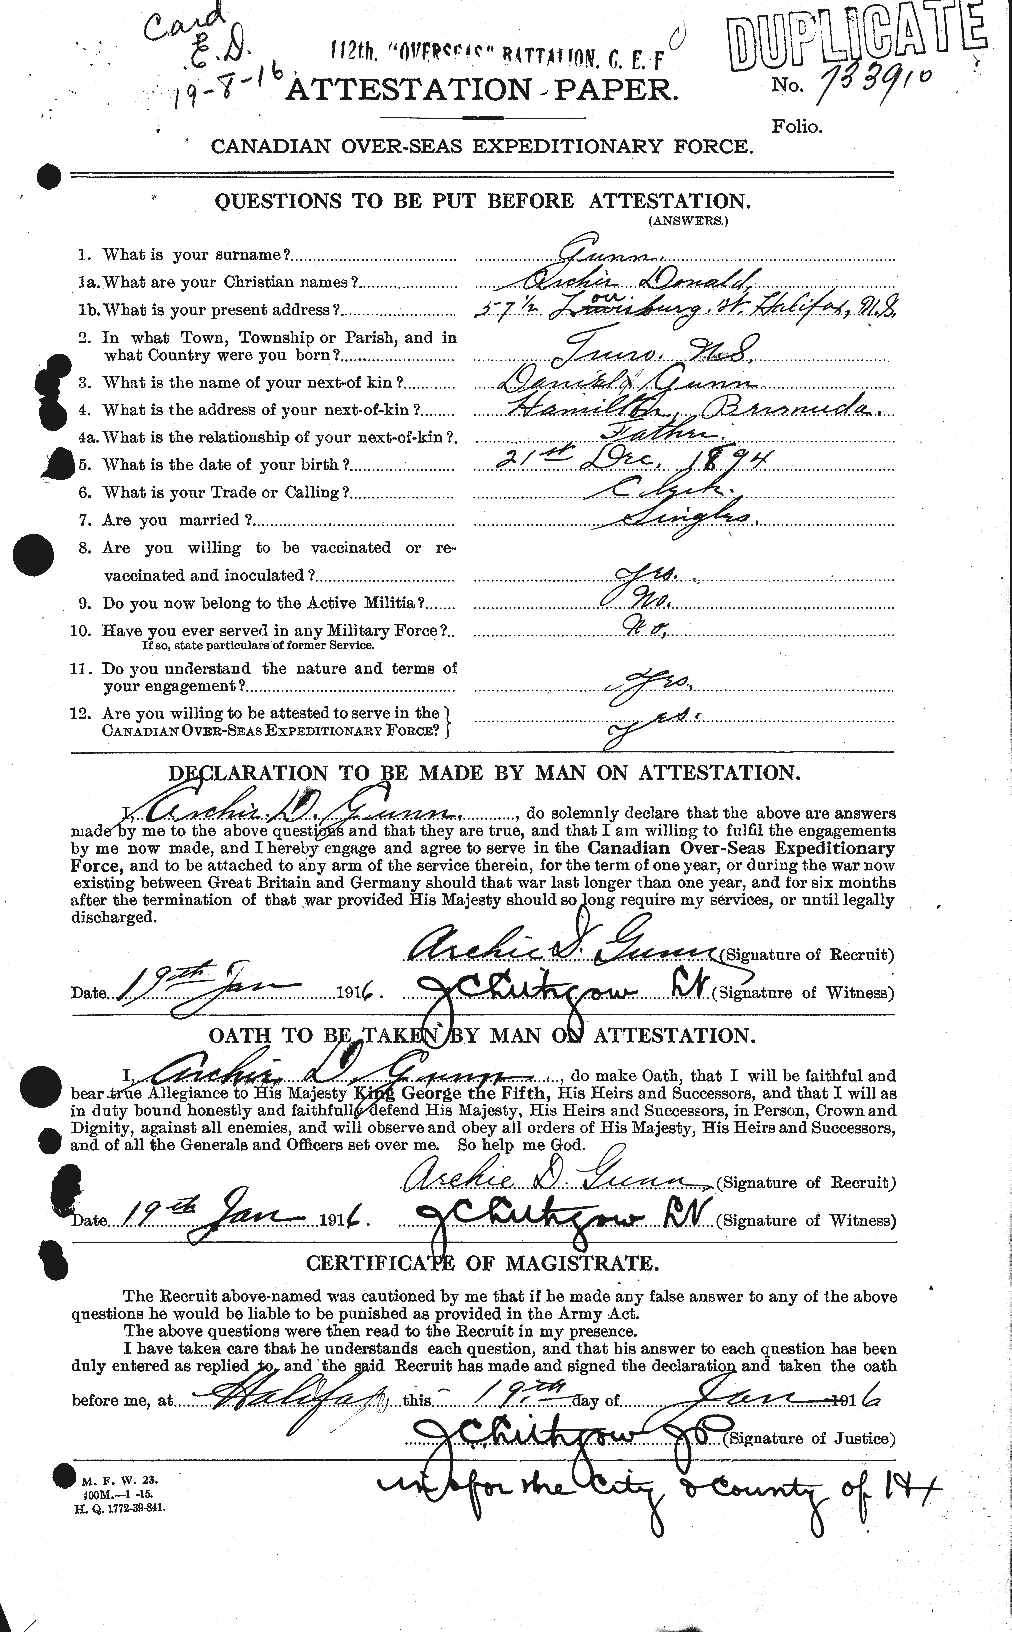 Personnel Records of the First World War - CEF 368000a